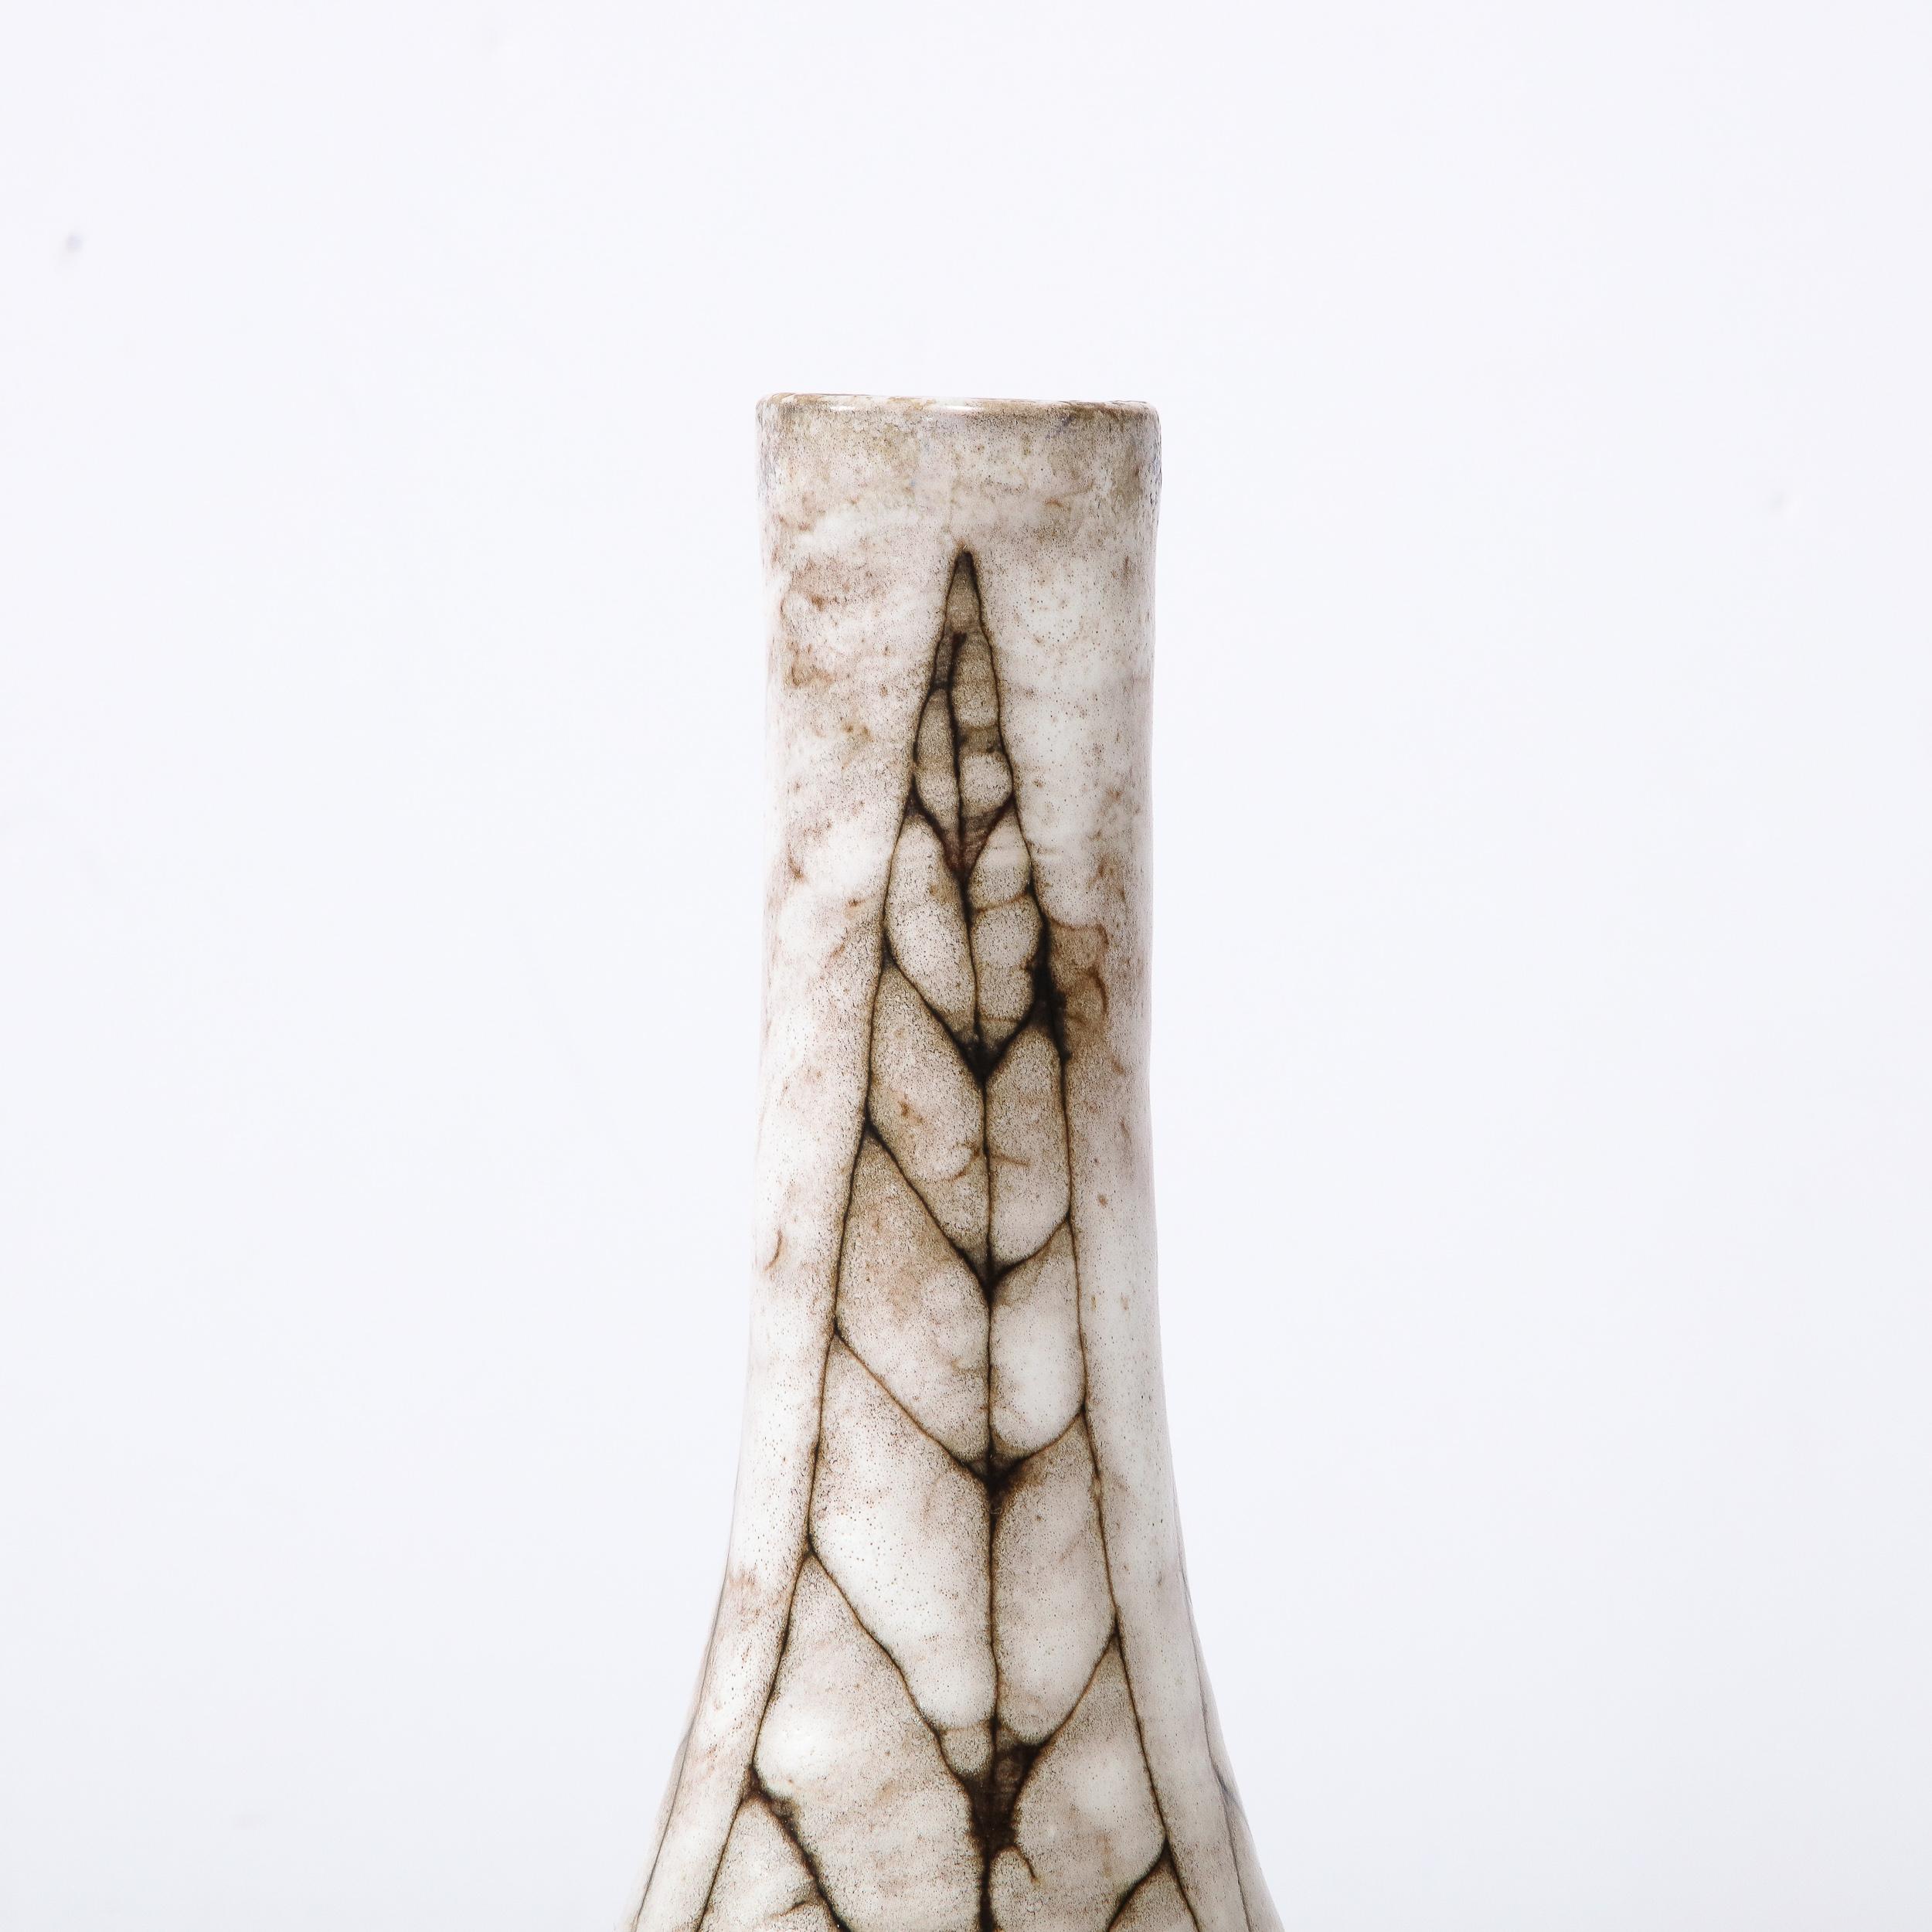 Glazed Mid-Century Modernist White and Earth Toned Tapered Ceramic Vase w/ Leaf Motif  For Sale